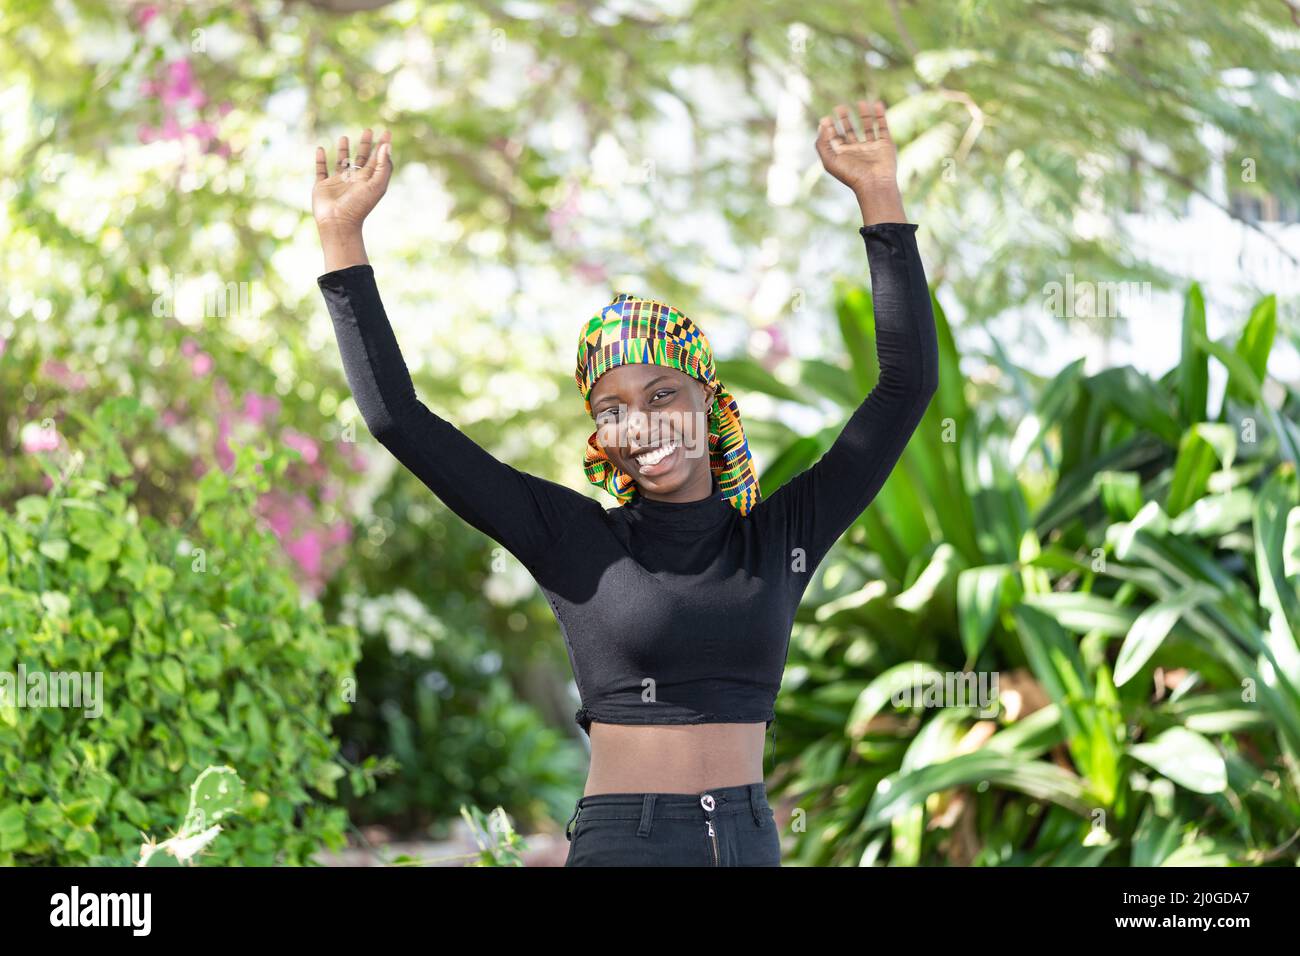 Gorgeous African girl in pants and long-sleeved black crop top standing in a flourishing garden with a big smile, raising her arms to the heavens as a Stock Photo